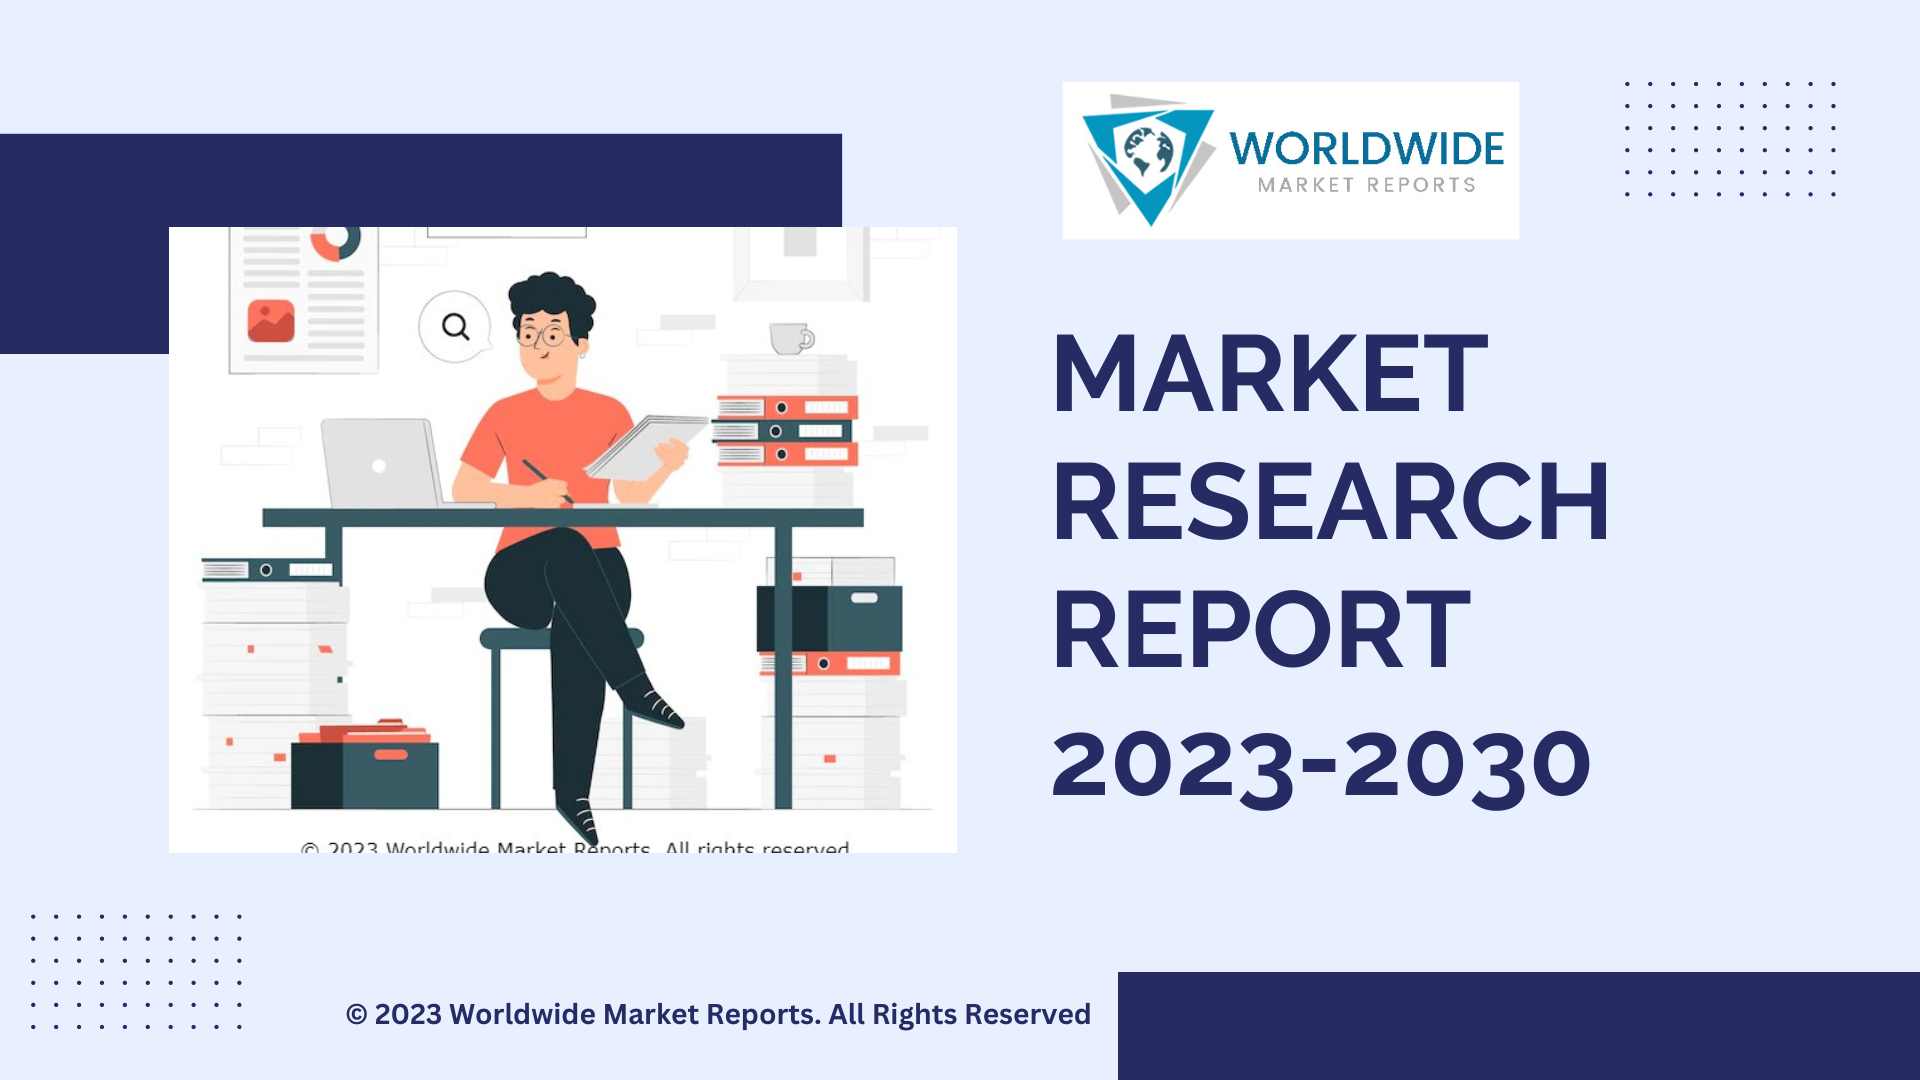 Animation Production Market 2023 with Growth Overview, Developments in Manufacturing Technology, Segmentation, Competitive Landscape and Forecast to 2030